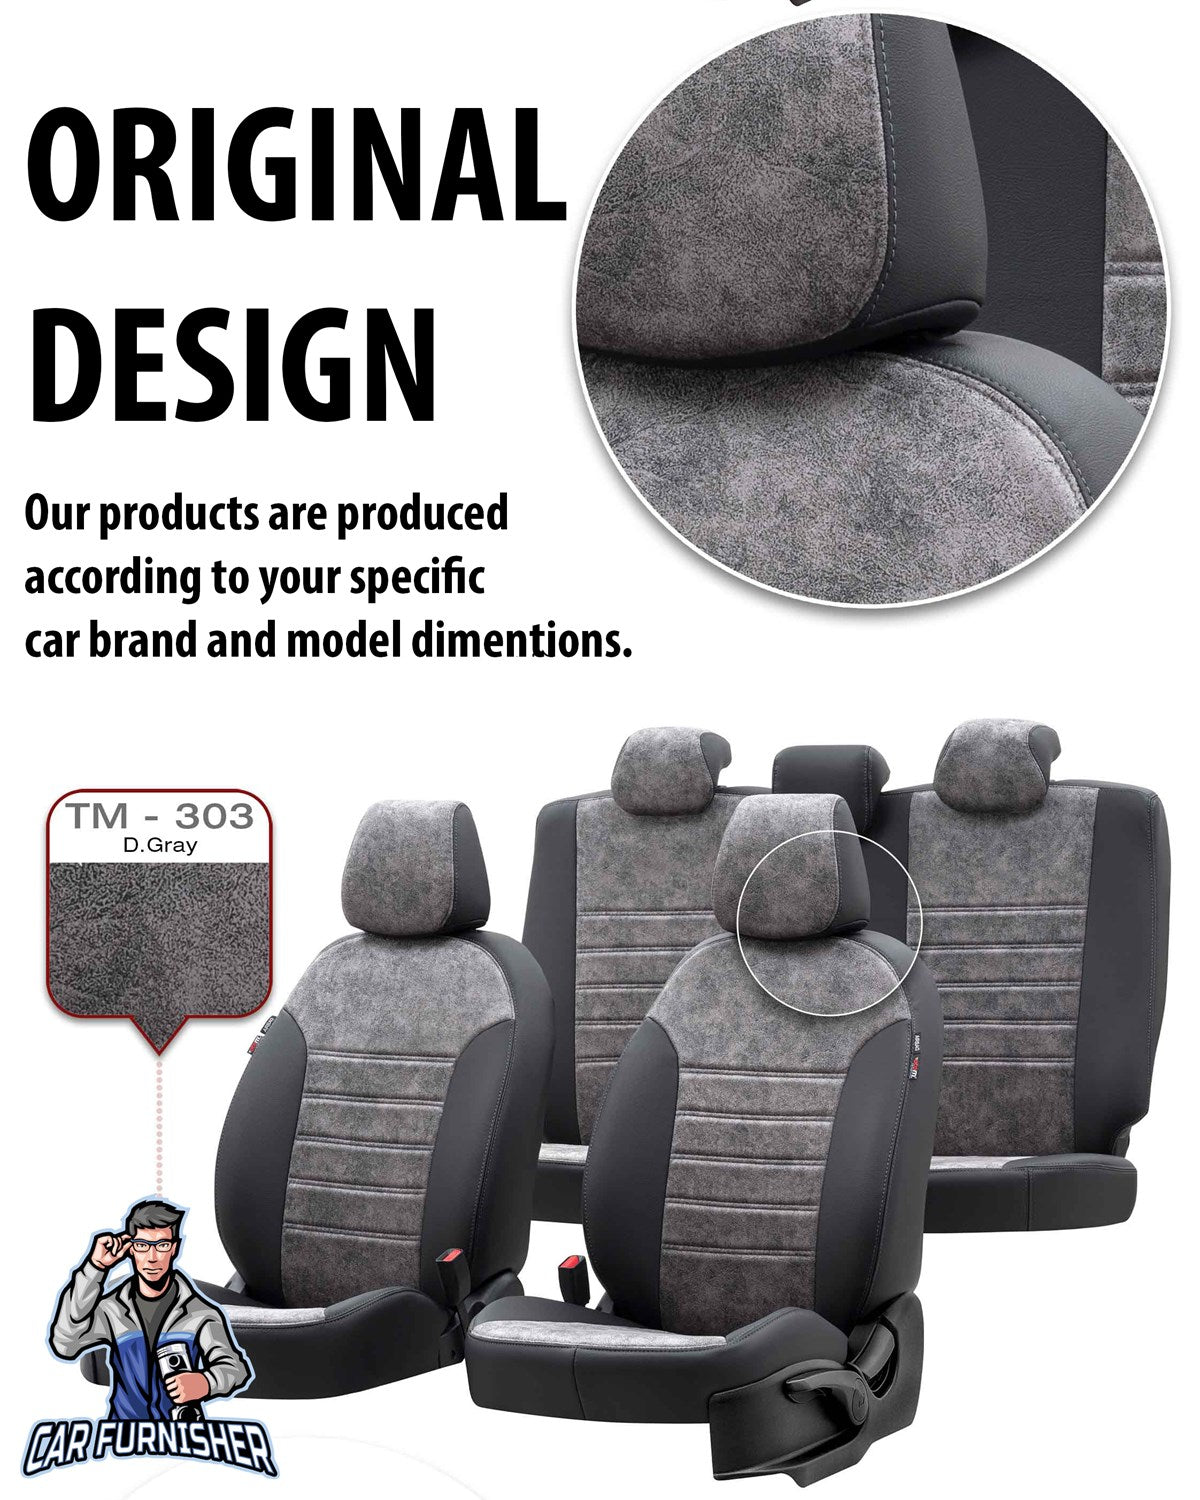 Toyota Prius Seat Cover Milano Suede Design Smoked Black Leather & Suede Fabric